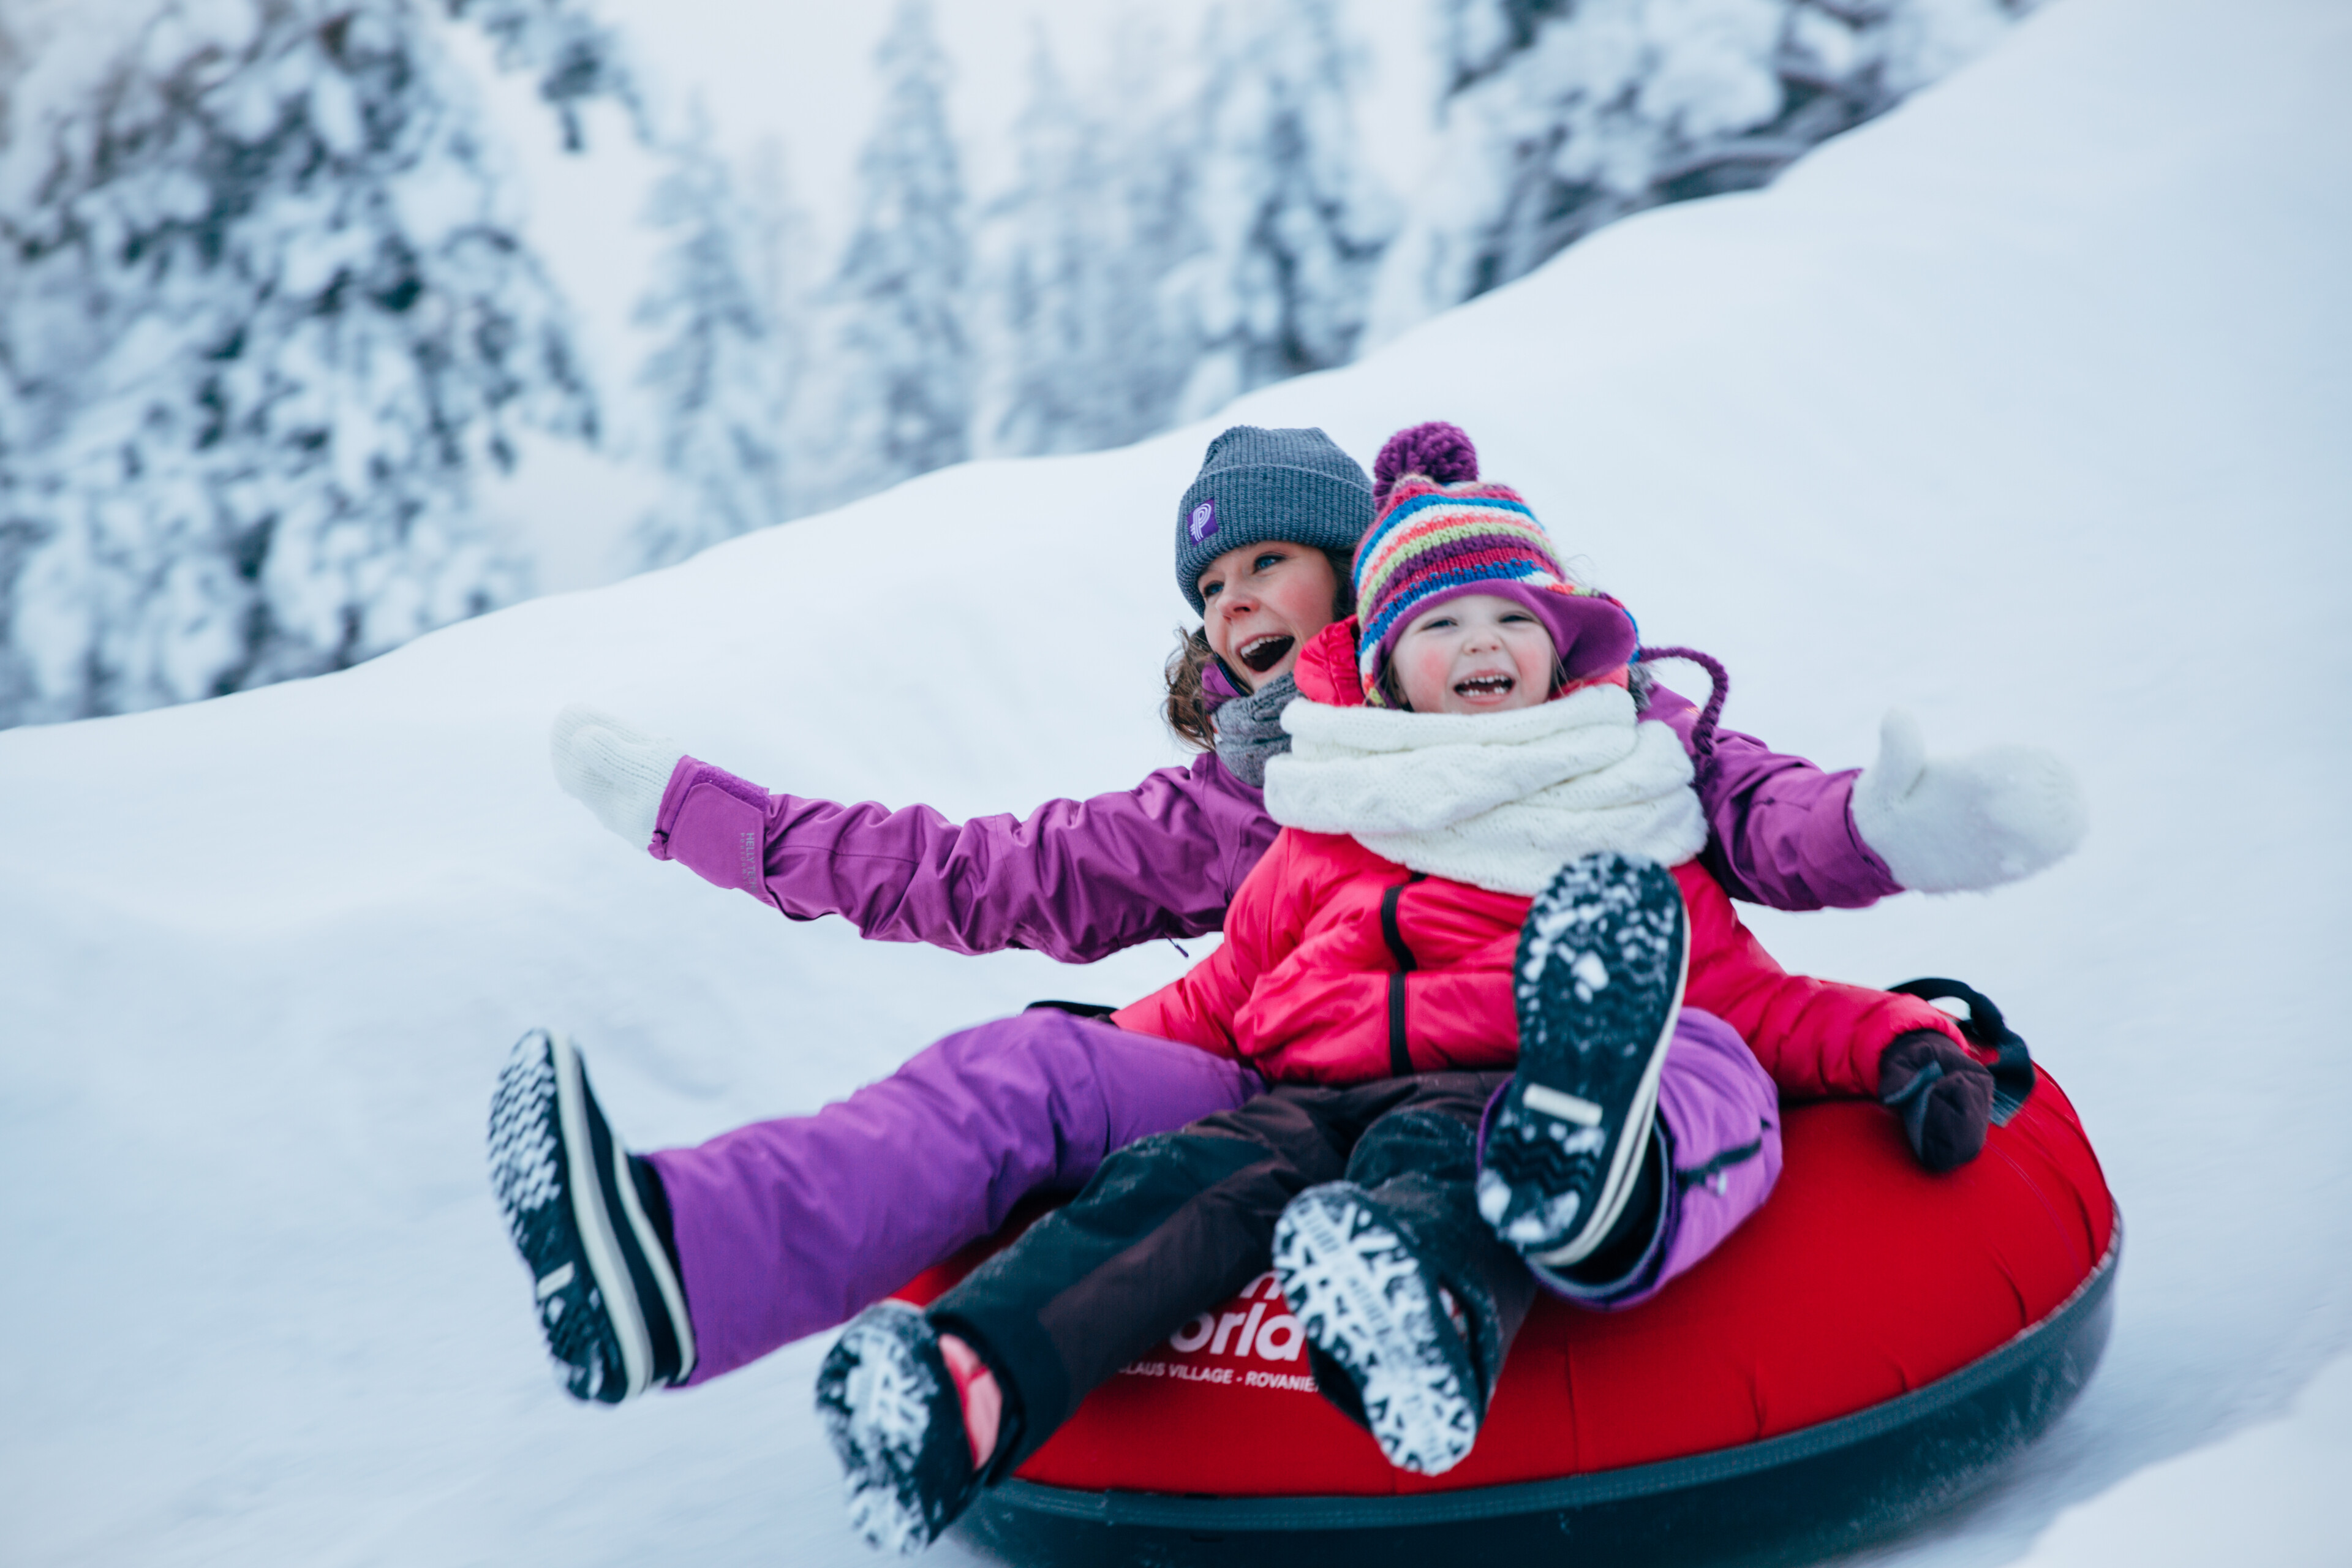 Snow and fun with a family in Snowmanworld in Rovaniemi, Lapland, Finland during winter.